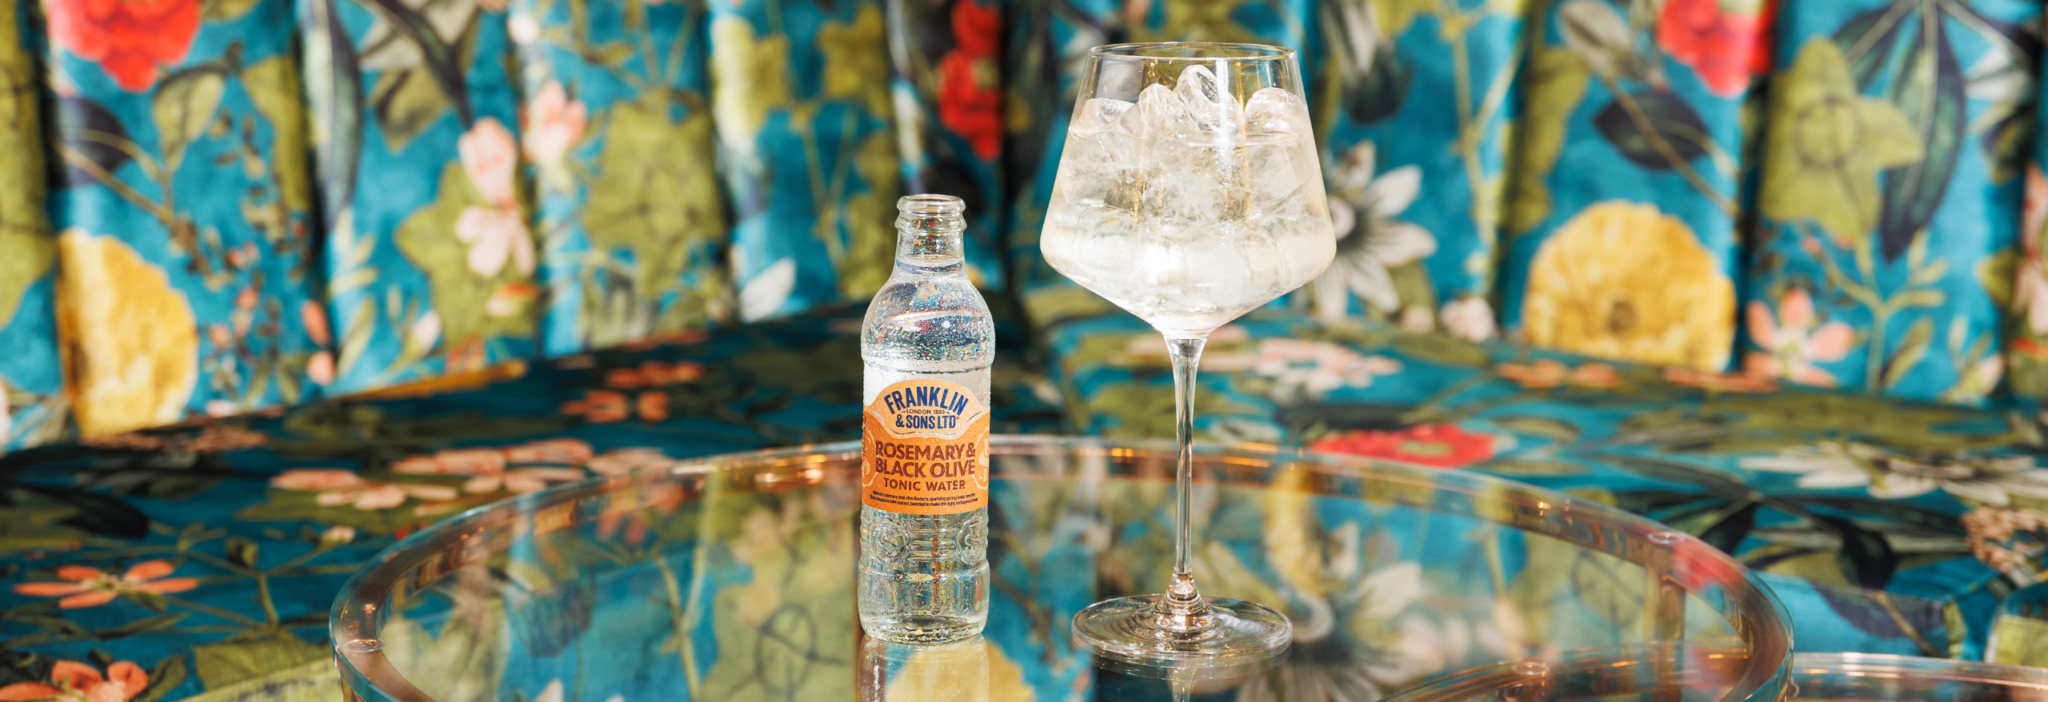 Rosemary spritz cocktail in a wine glass with a patterned floral background | Franklin & Sons